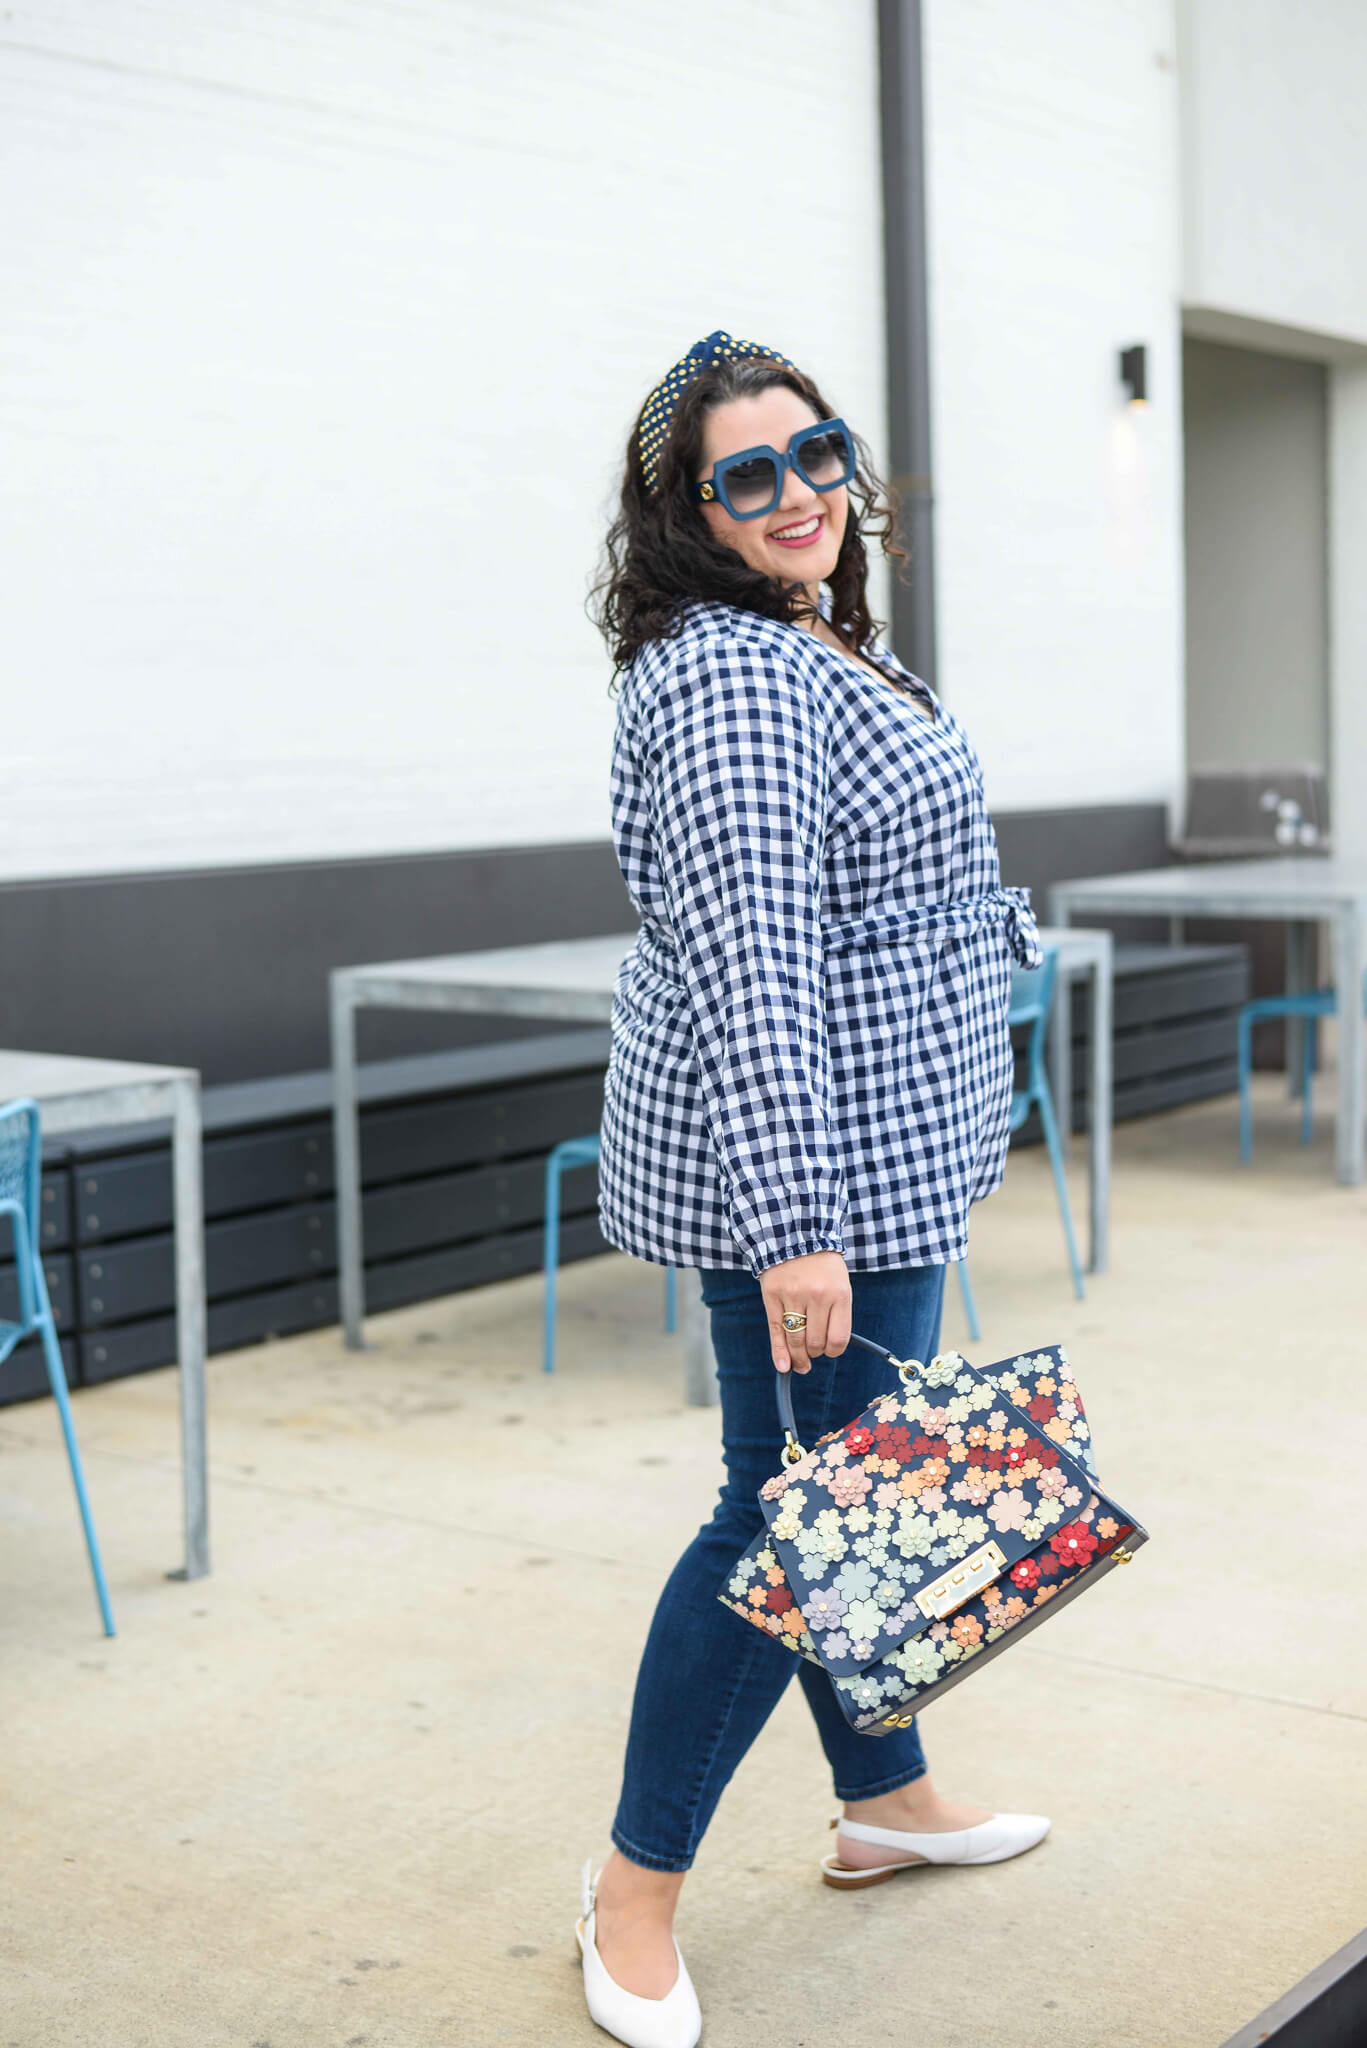 The perfect preppy fall transition outfit includes a navy and white plus size gingham top, skinny jeans and embellished headband